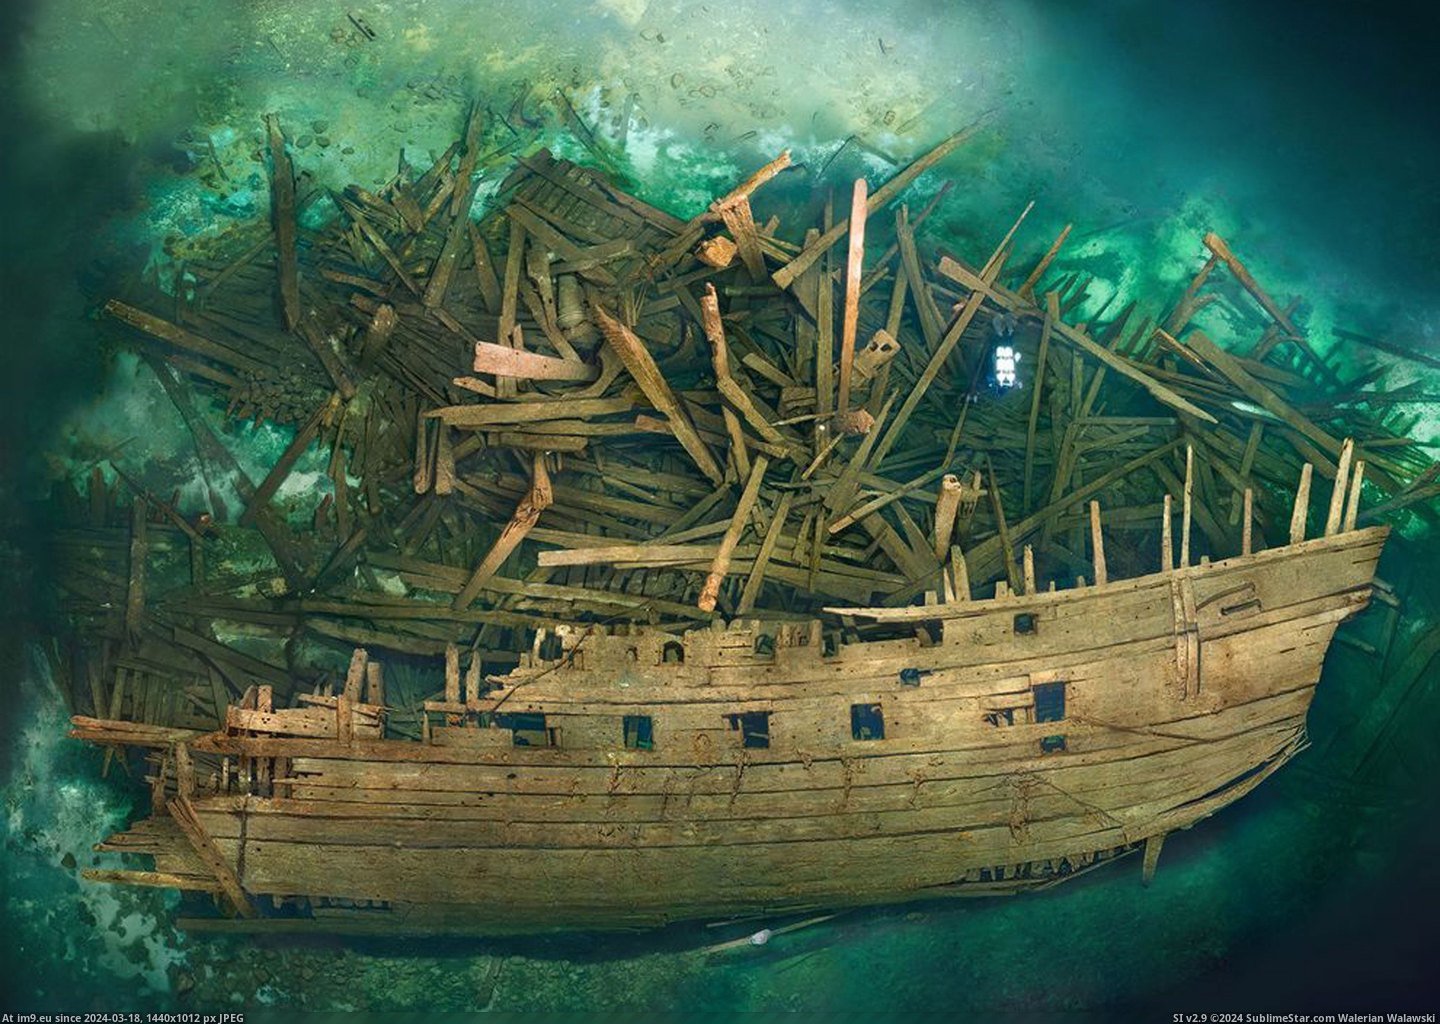 #Years #Pretty #Battle #Exploded #Wreck #Preserved #Warship #Land #Mars #Swedish [Pics] Wreck of the Swedish warship Mars, which exploded during the first battle of Öland. Pretty well preserved for 500 years u Pic. (Obraz z album My r/PICS favs))